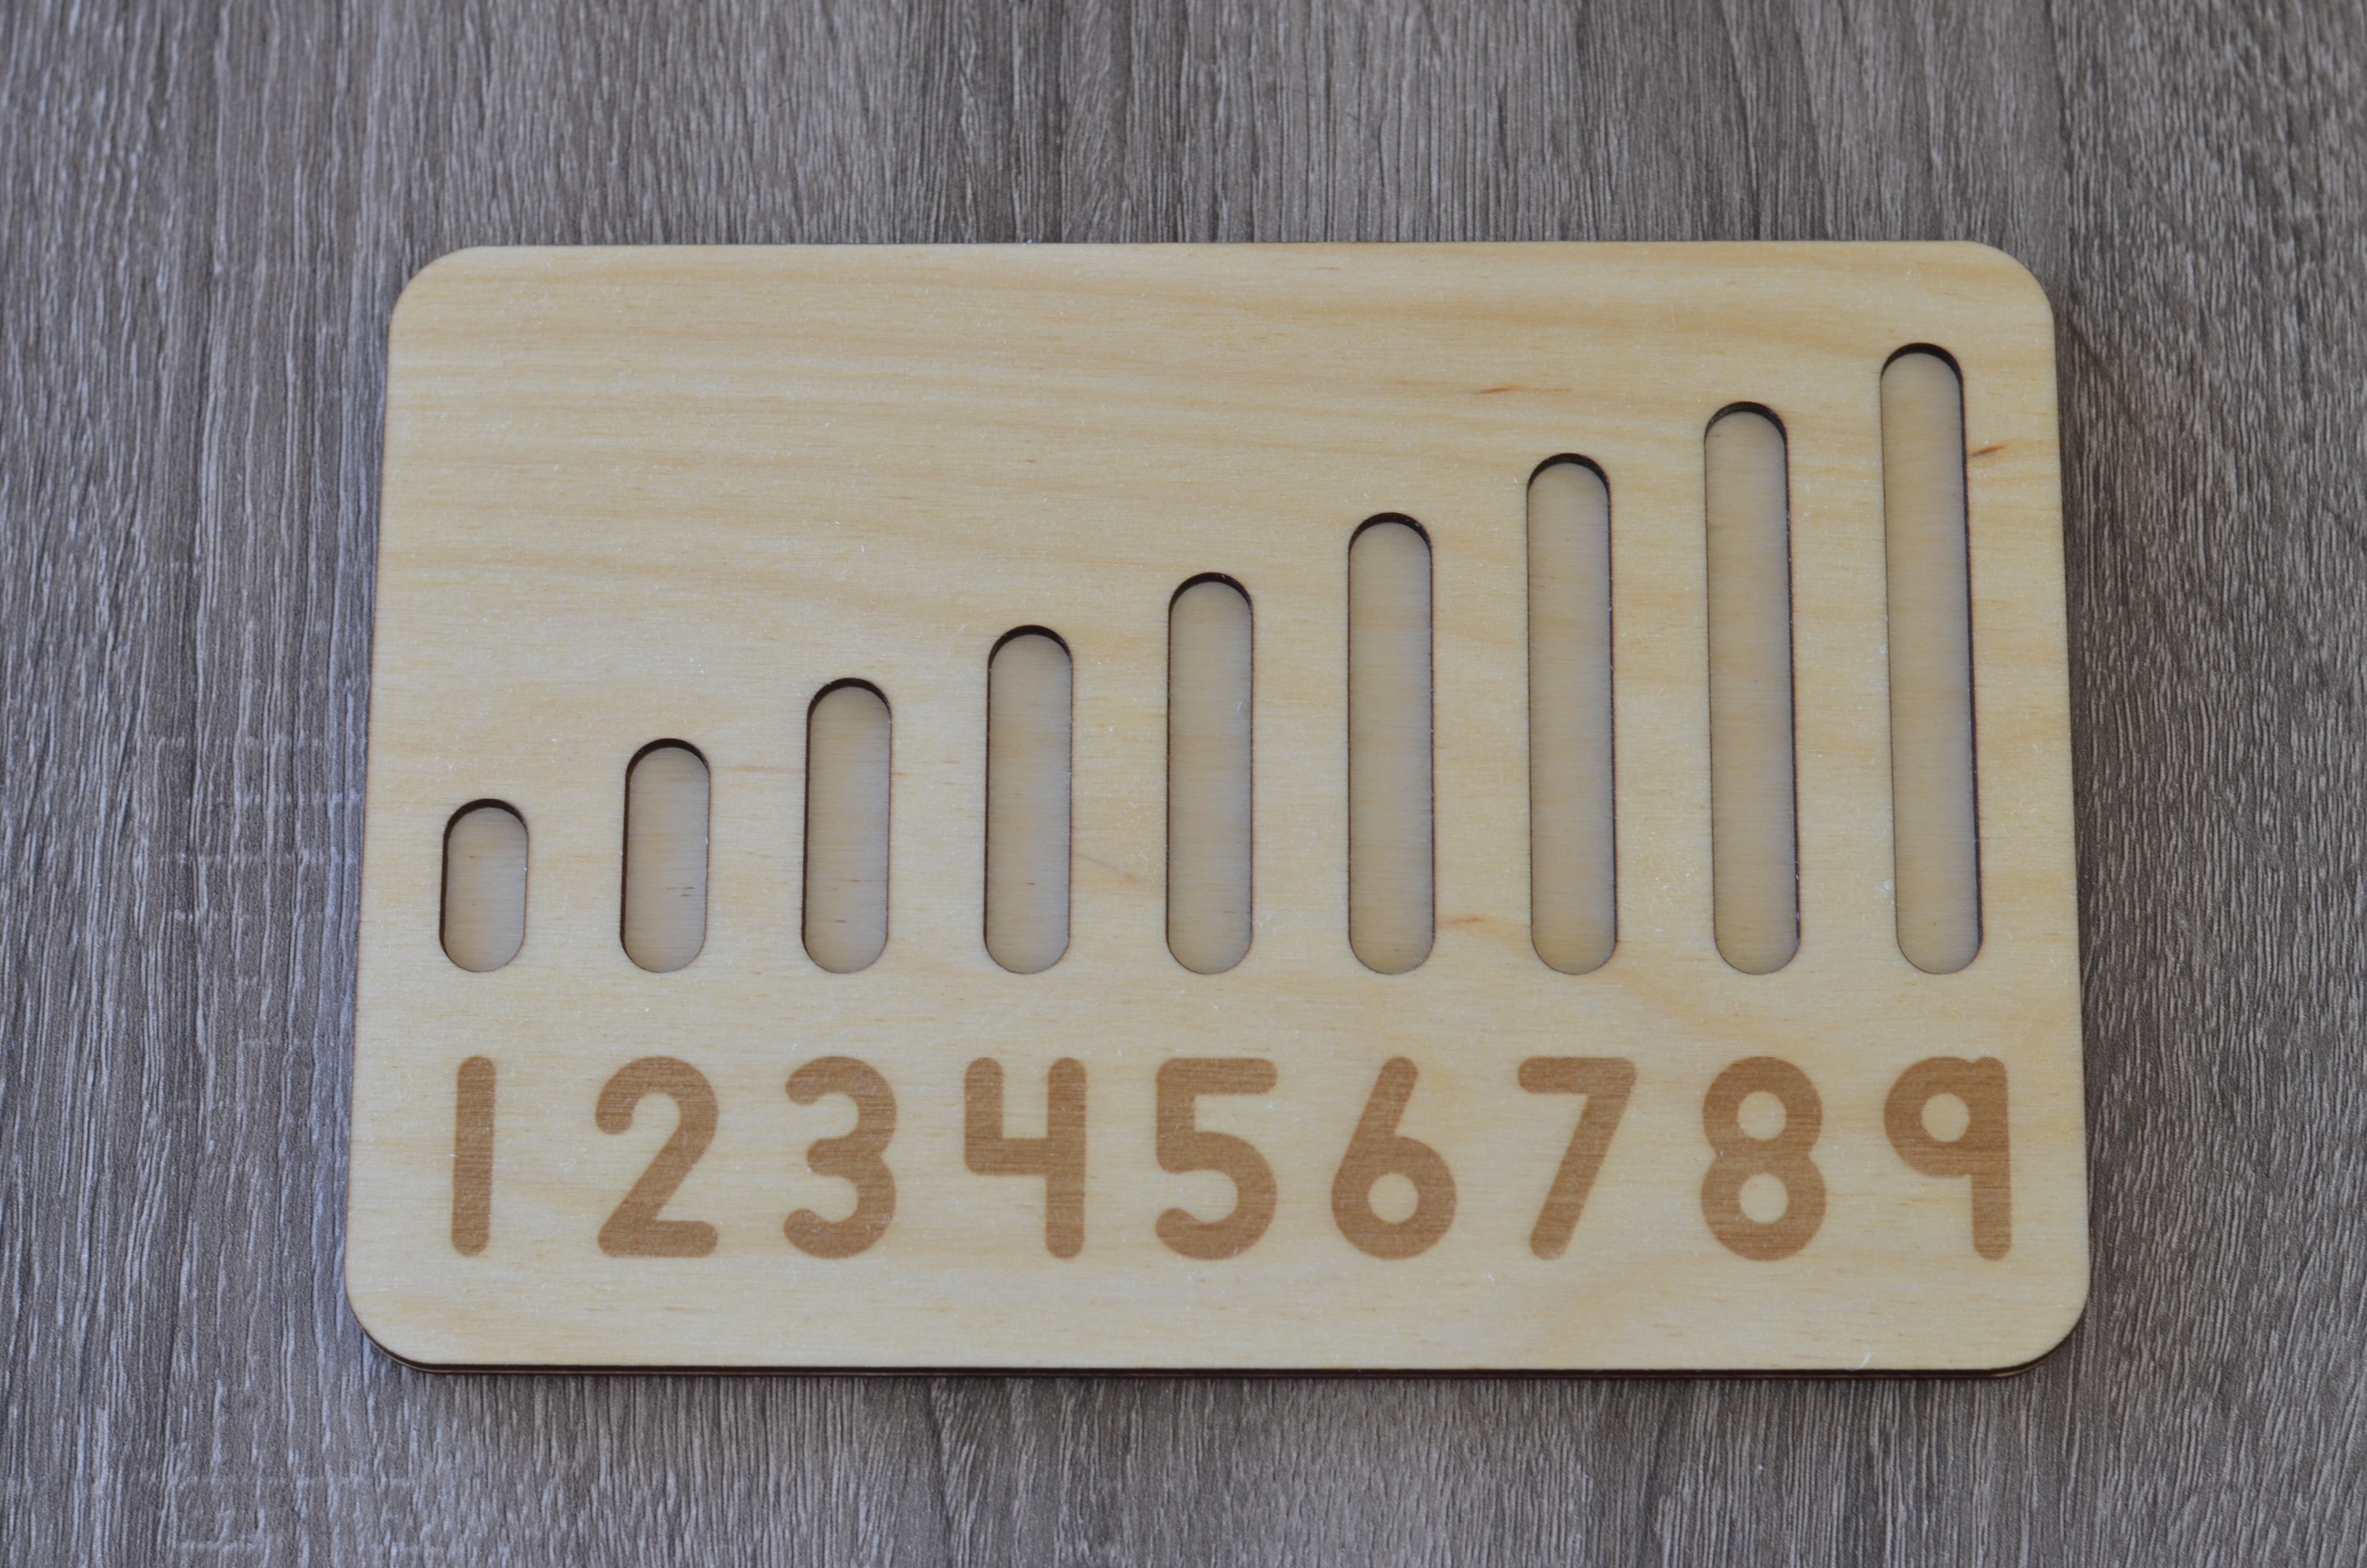 Montessori learning numbers 1-9 bead bars and number board